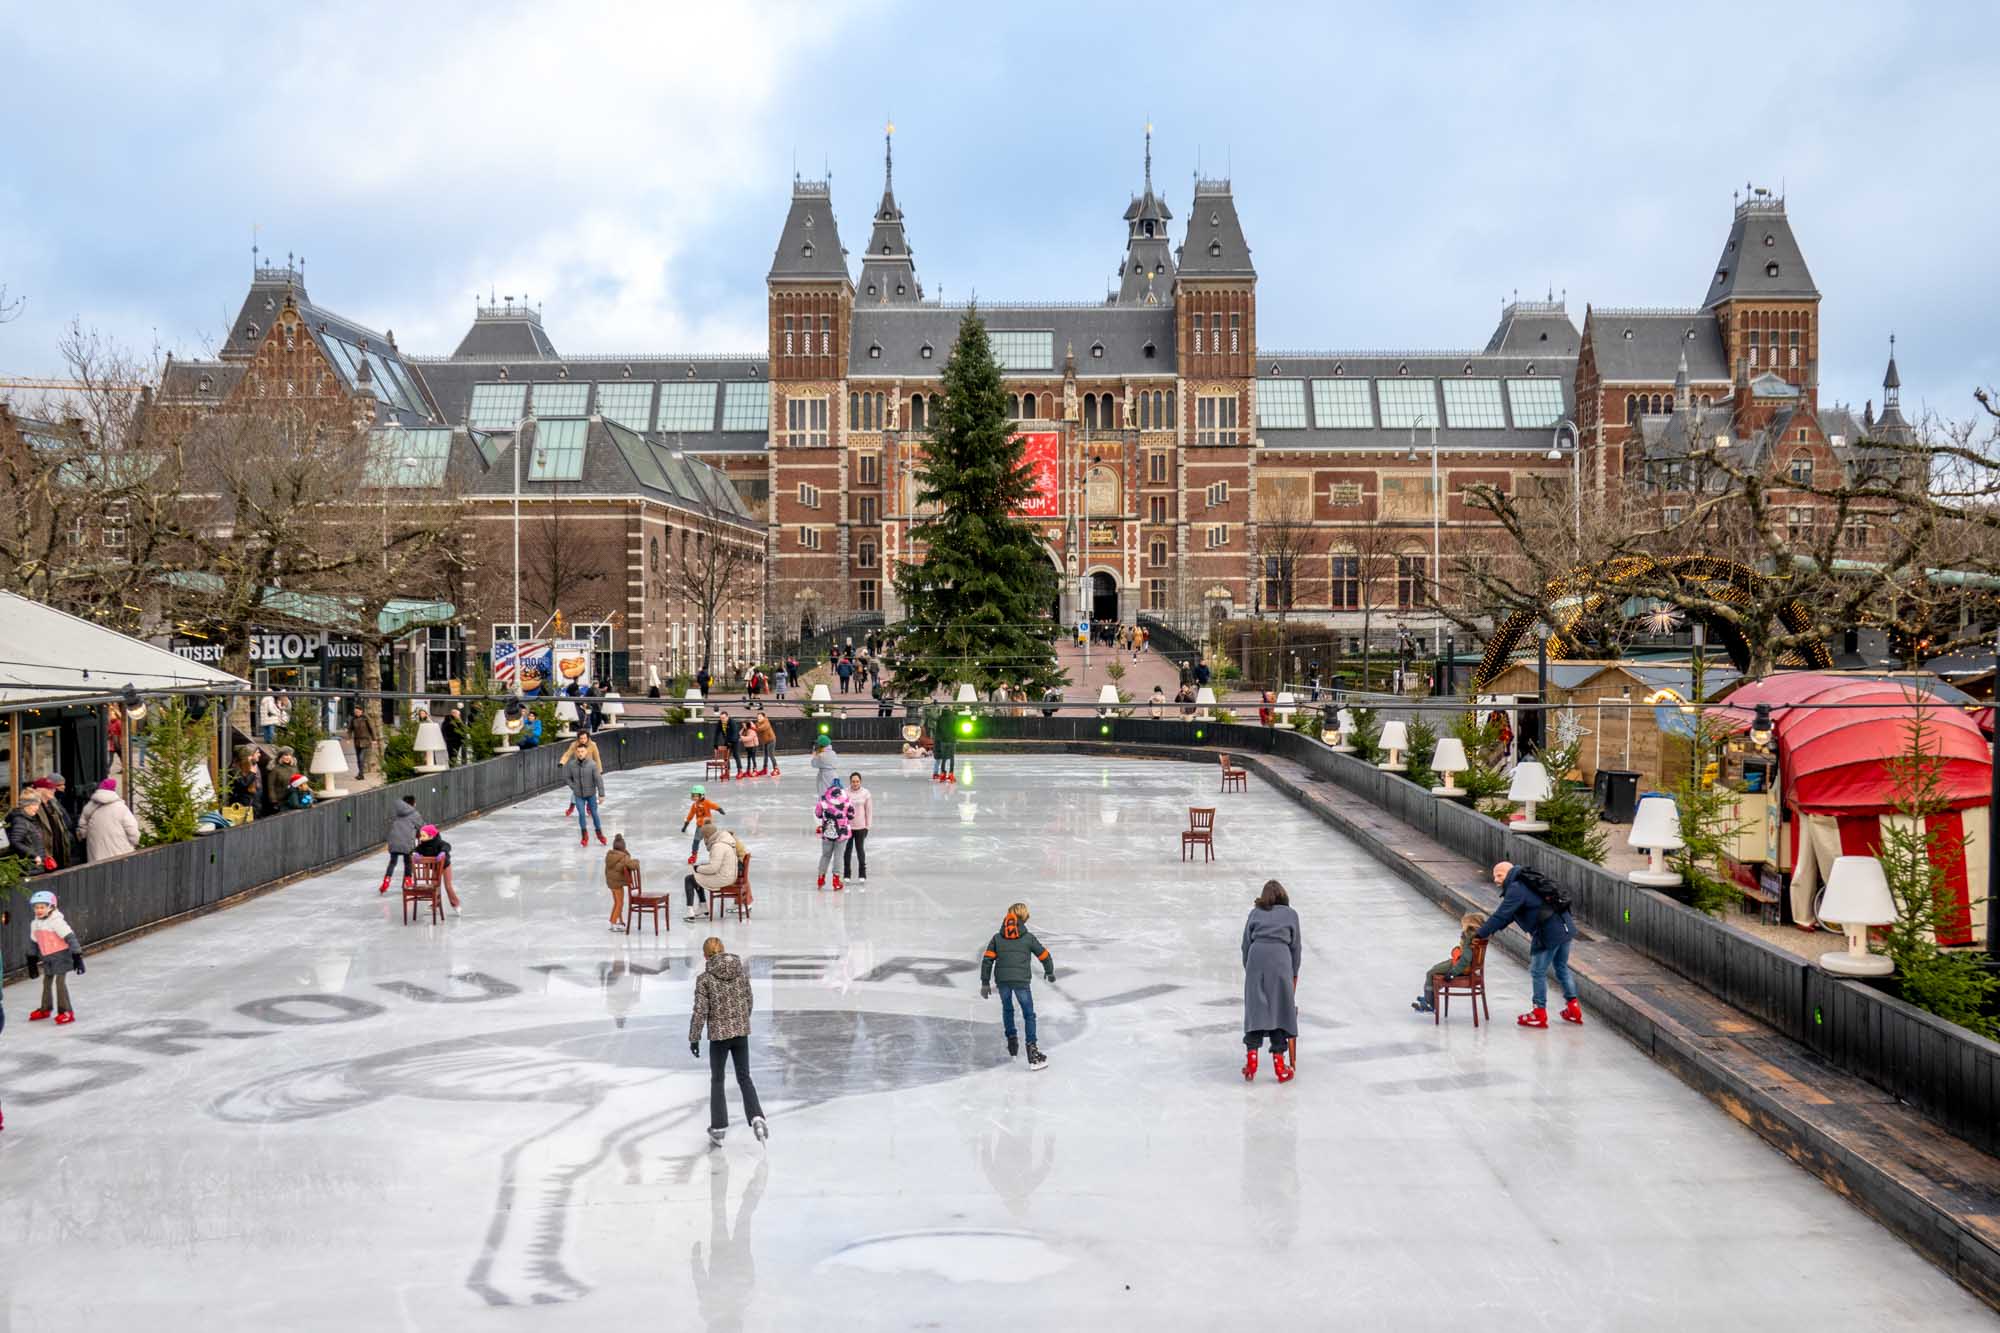 People on an ice-skating rink in an Amsterdam city square surrounded by Christmas market stalls